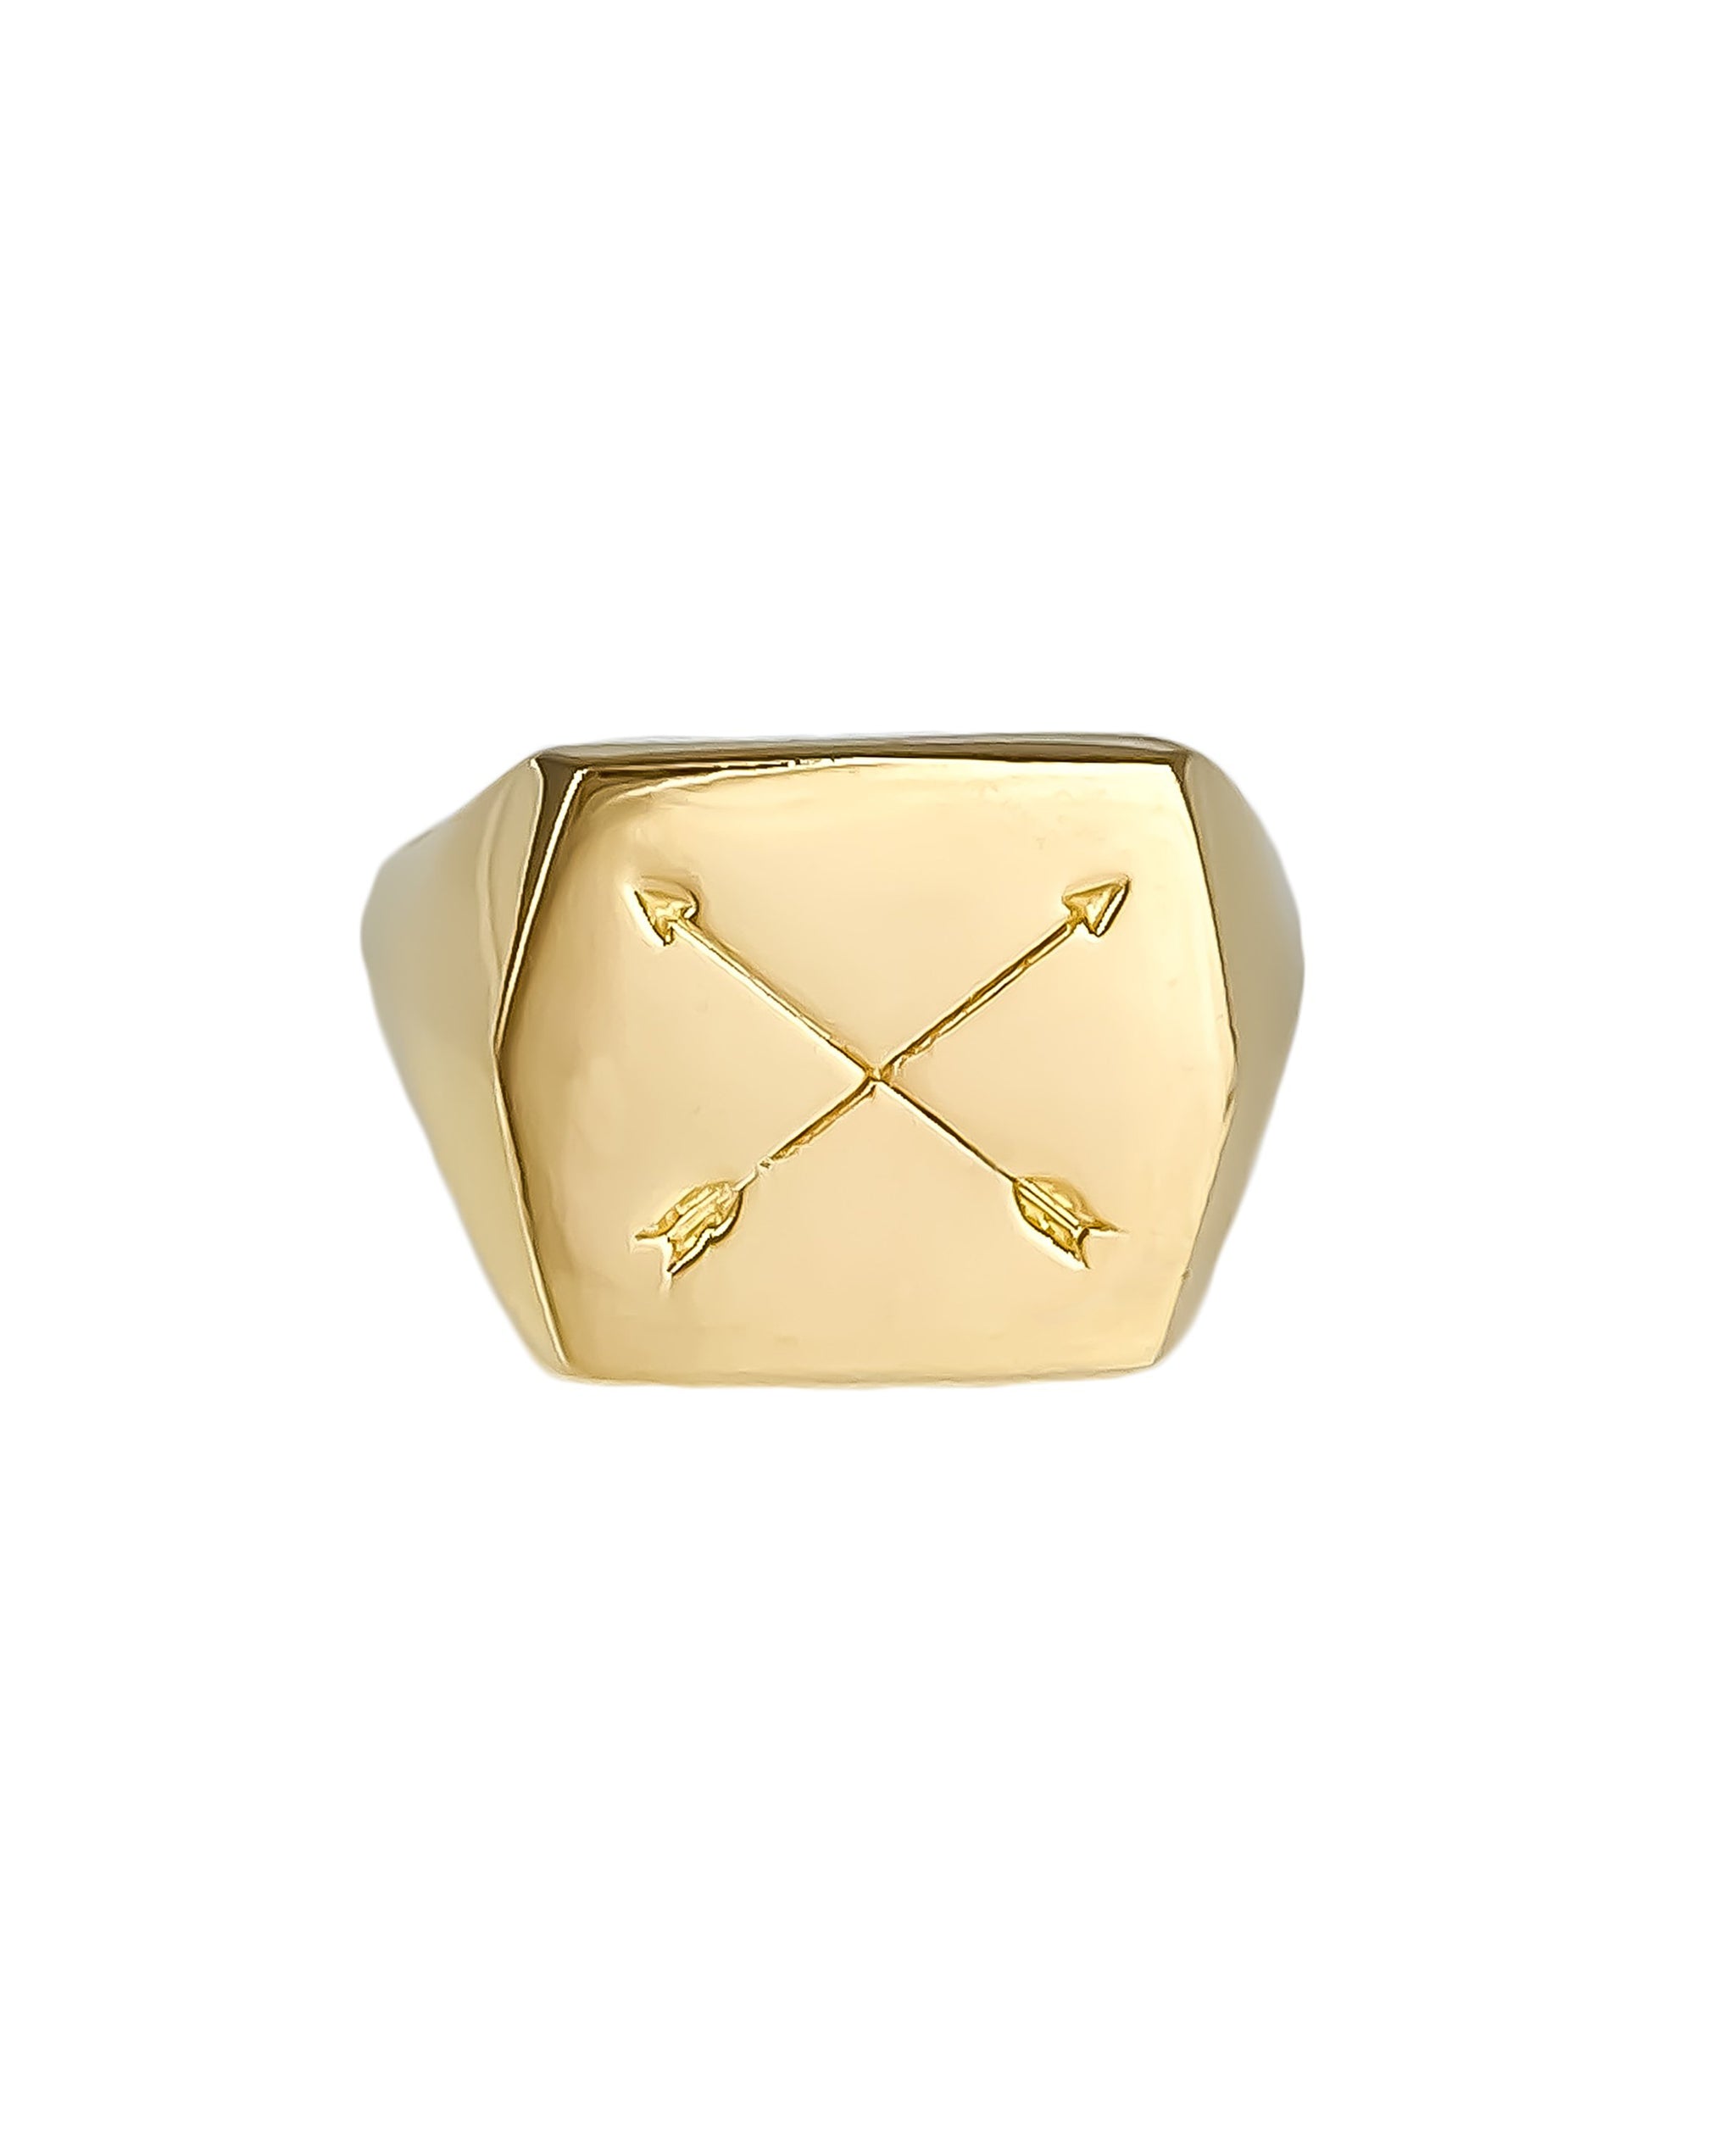 Nomad Ring, 14k Gold Vermeil Squared signet Ring with crossed arrows, 